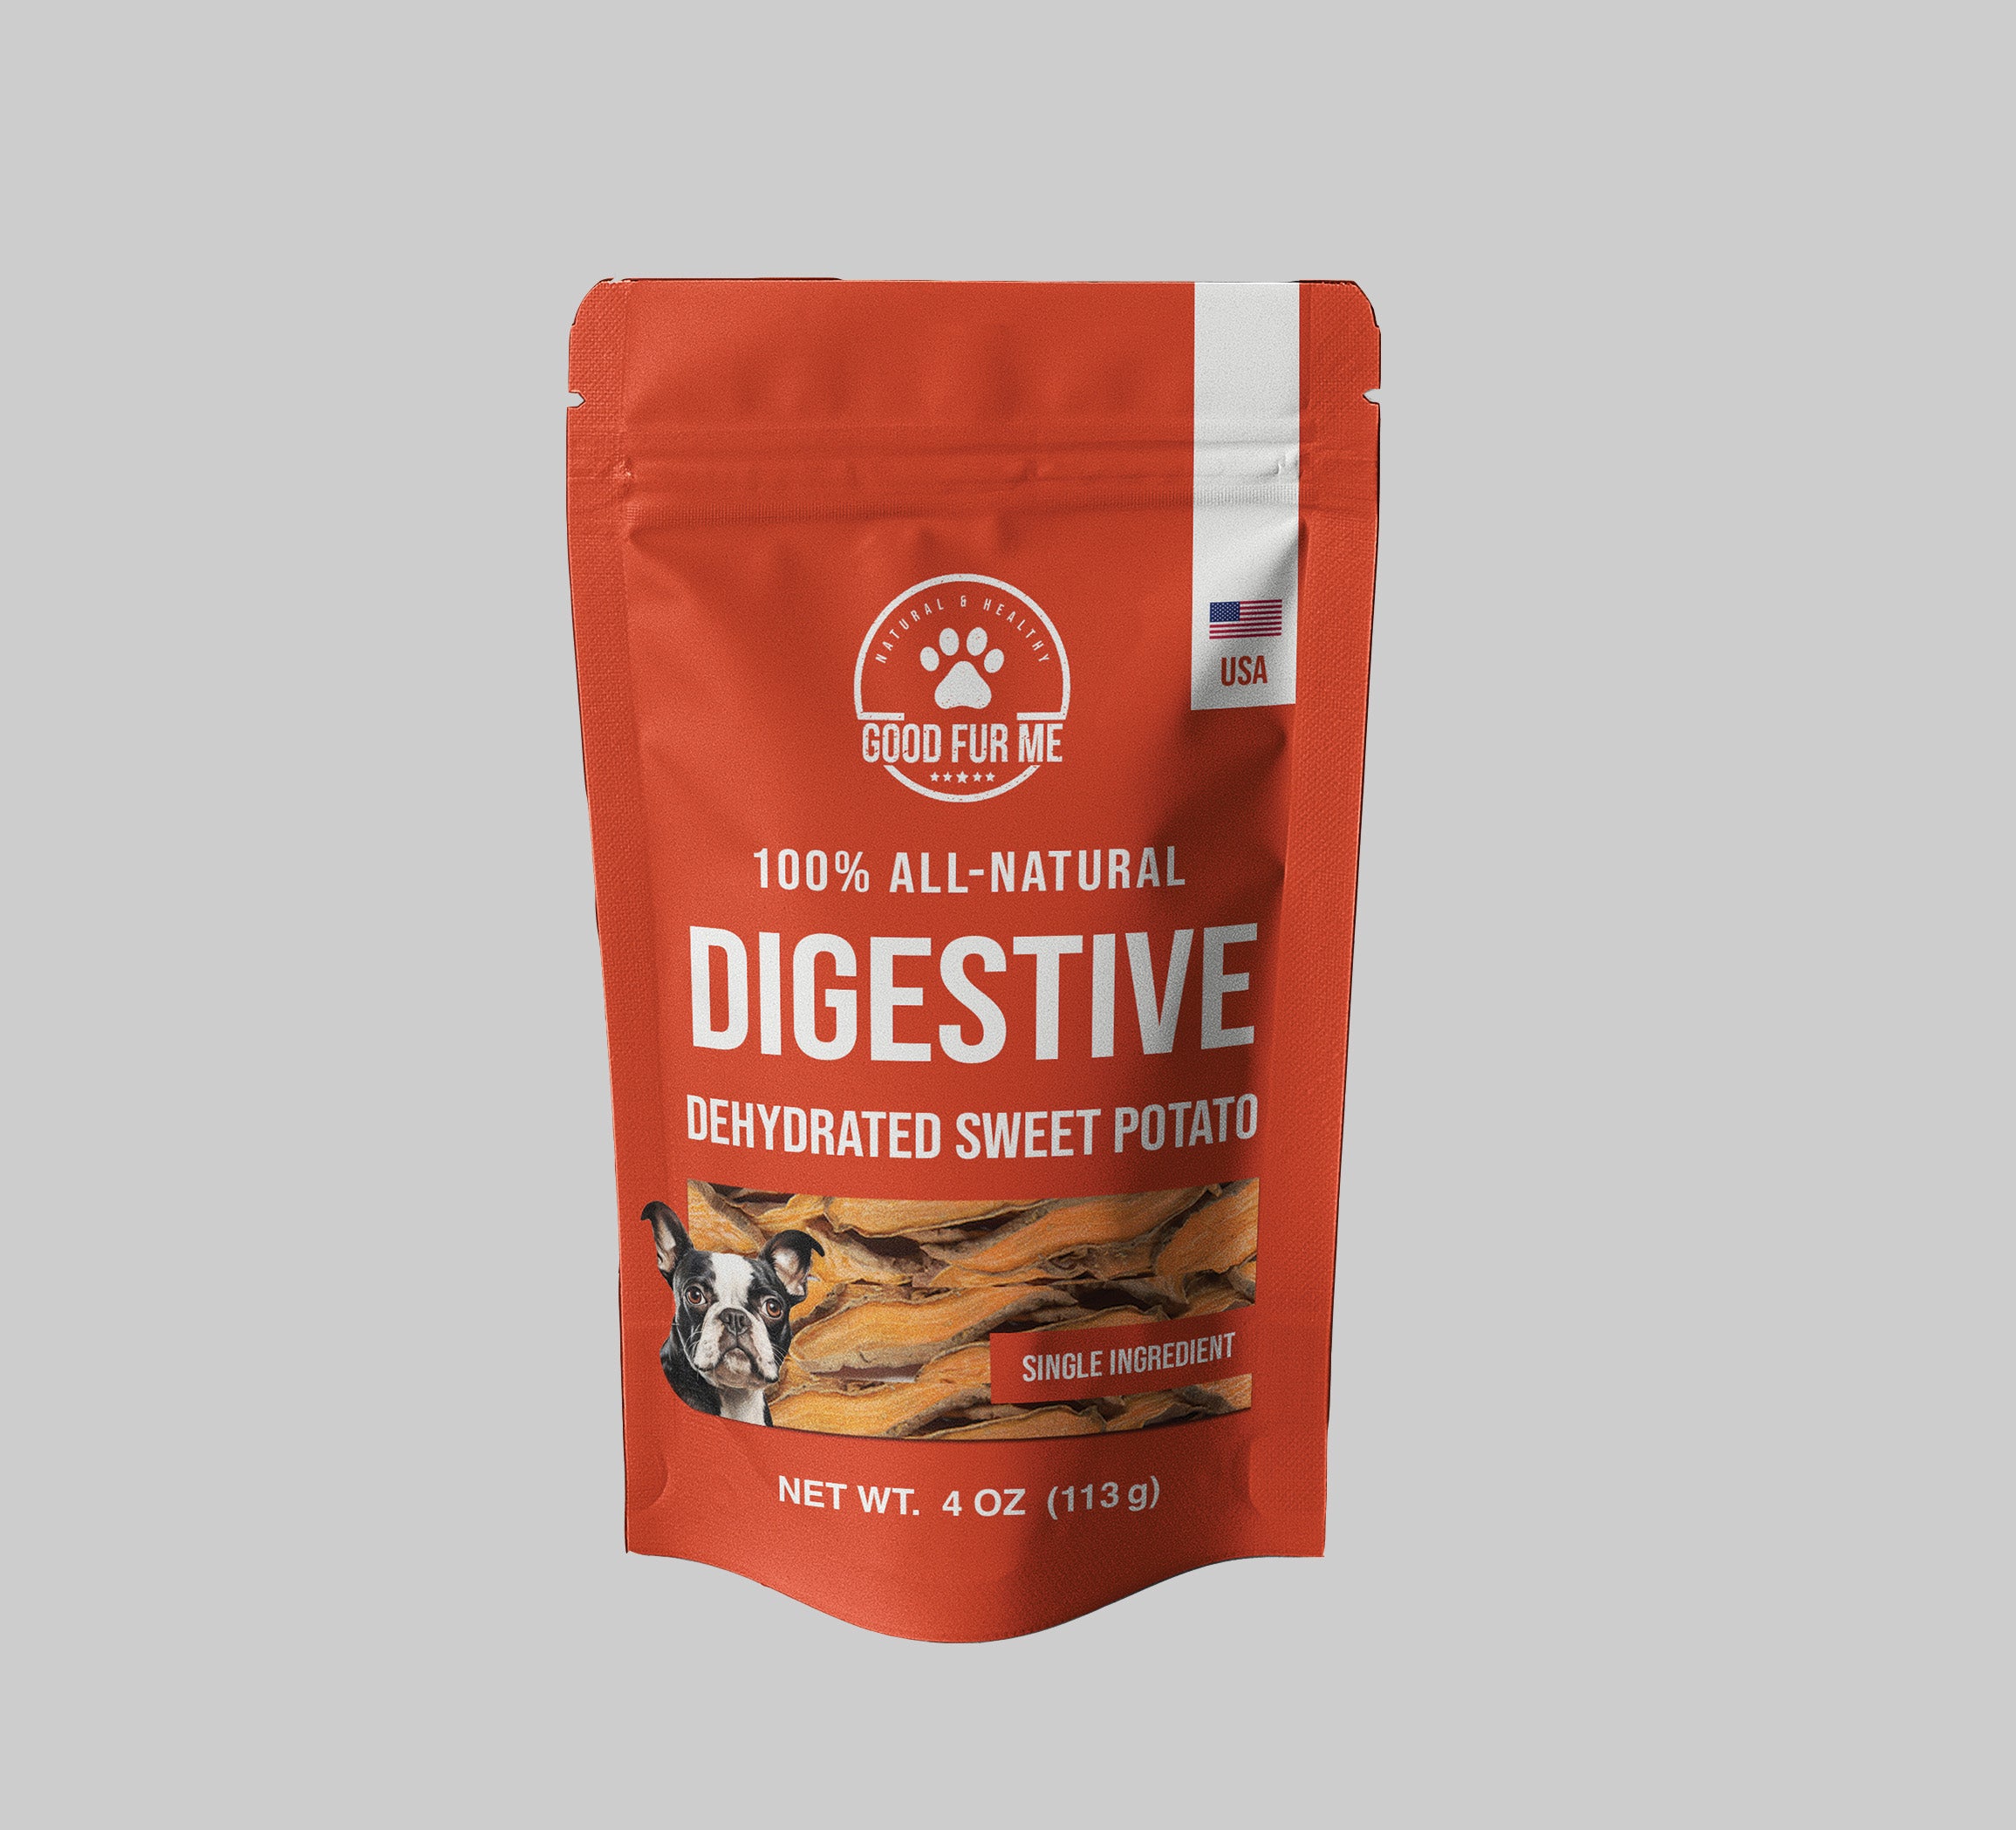 100% All-Natural Digestive Dehydrated Sweet Potatoes